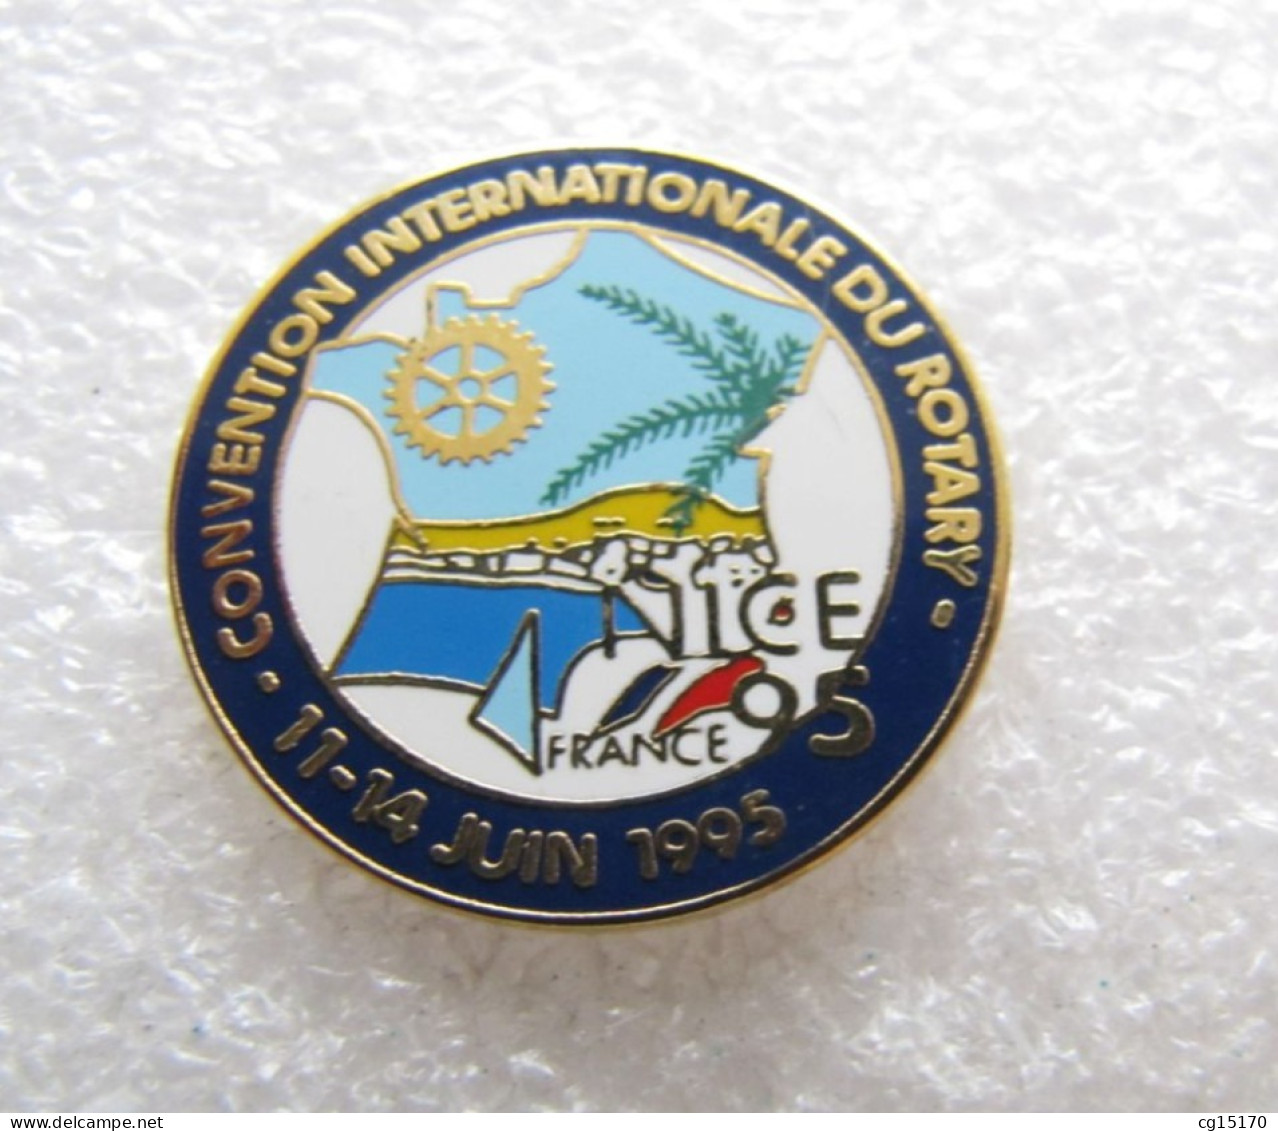 TOP  PIN'S    CONVENTION INTERNATIONALE DU ROTARY  NICE  1995 Email Grand Feu  PALMIER - Vereinswesen